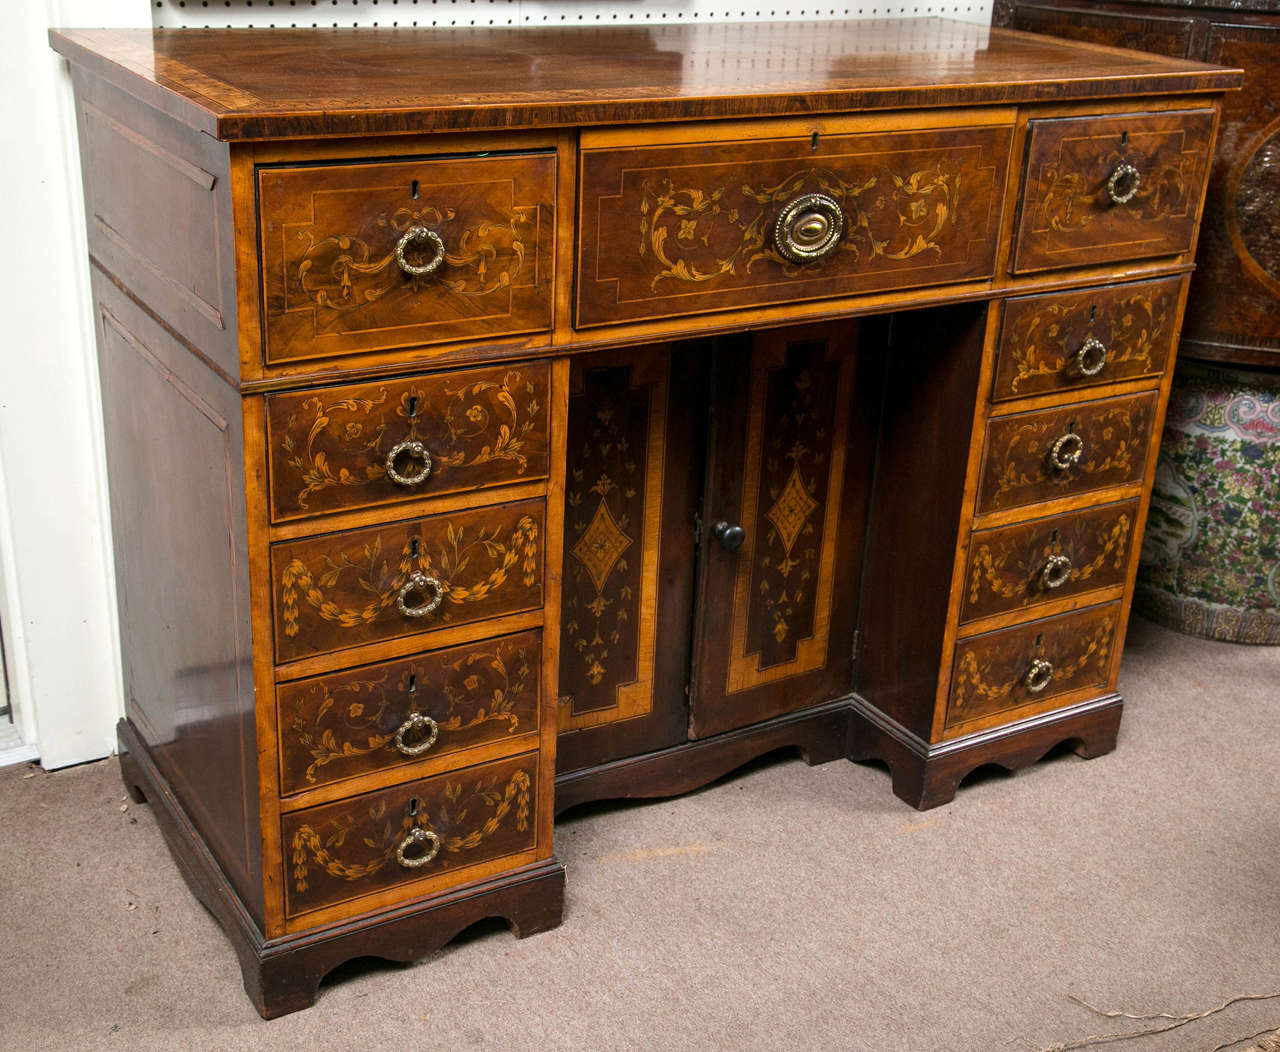 This desk is of light colored mahogany with inlays of swags, vines and leaves in satin wood or other very light wood.
The top is banded in a 1.5 inch wide band of hand done pen work on satin wood, bordered by ebony.
Four drawers on either side